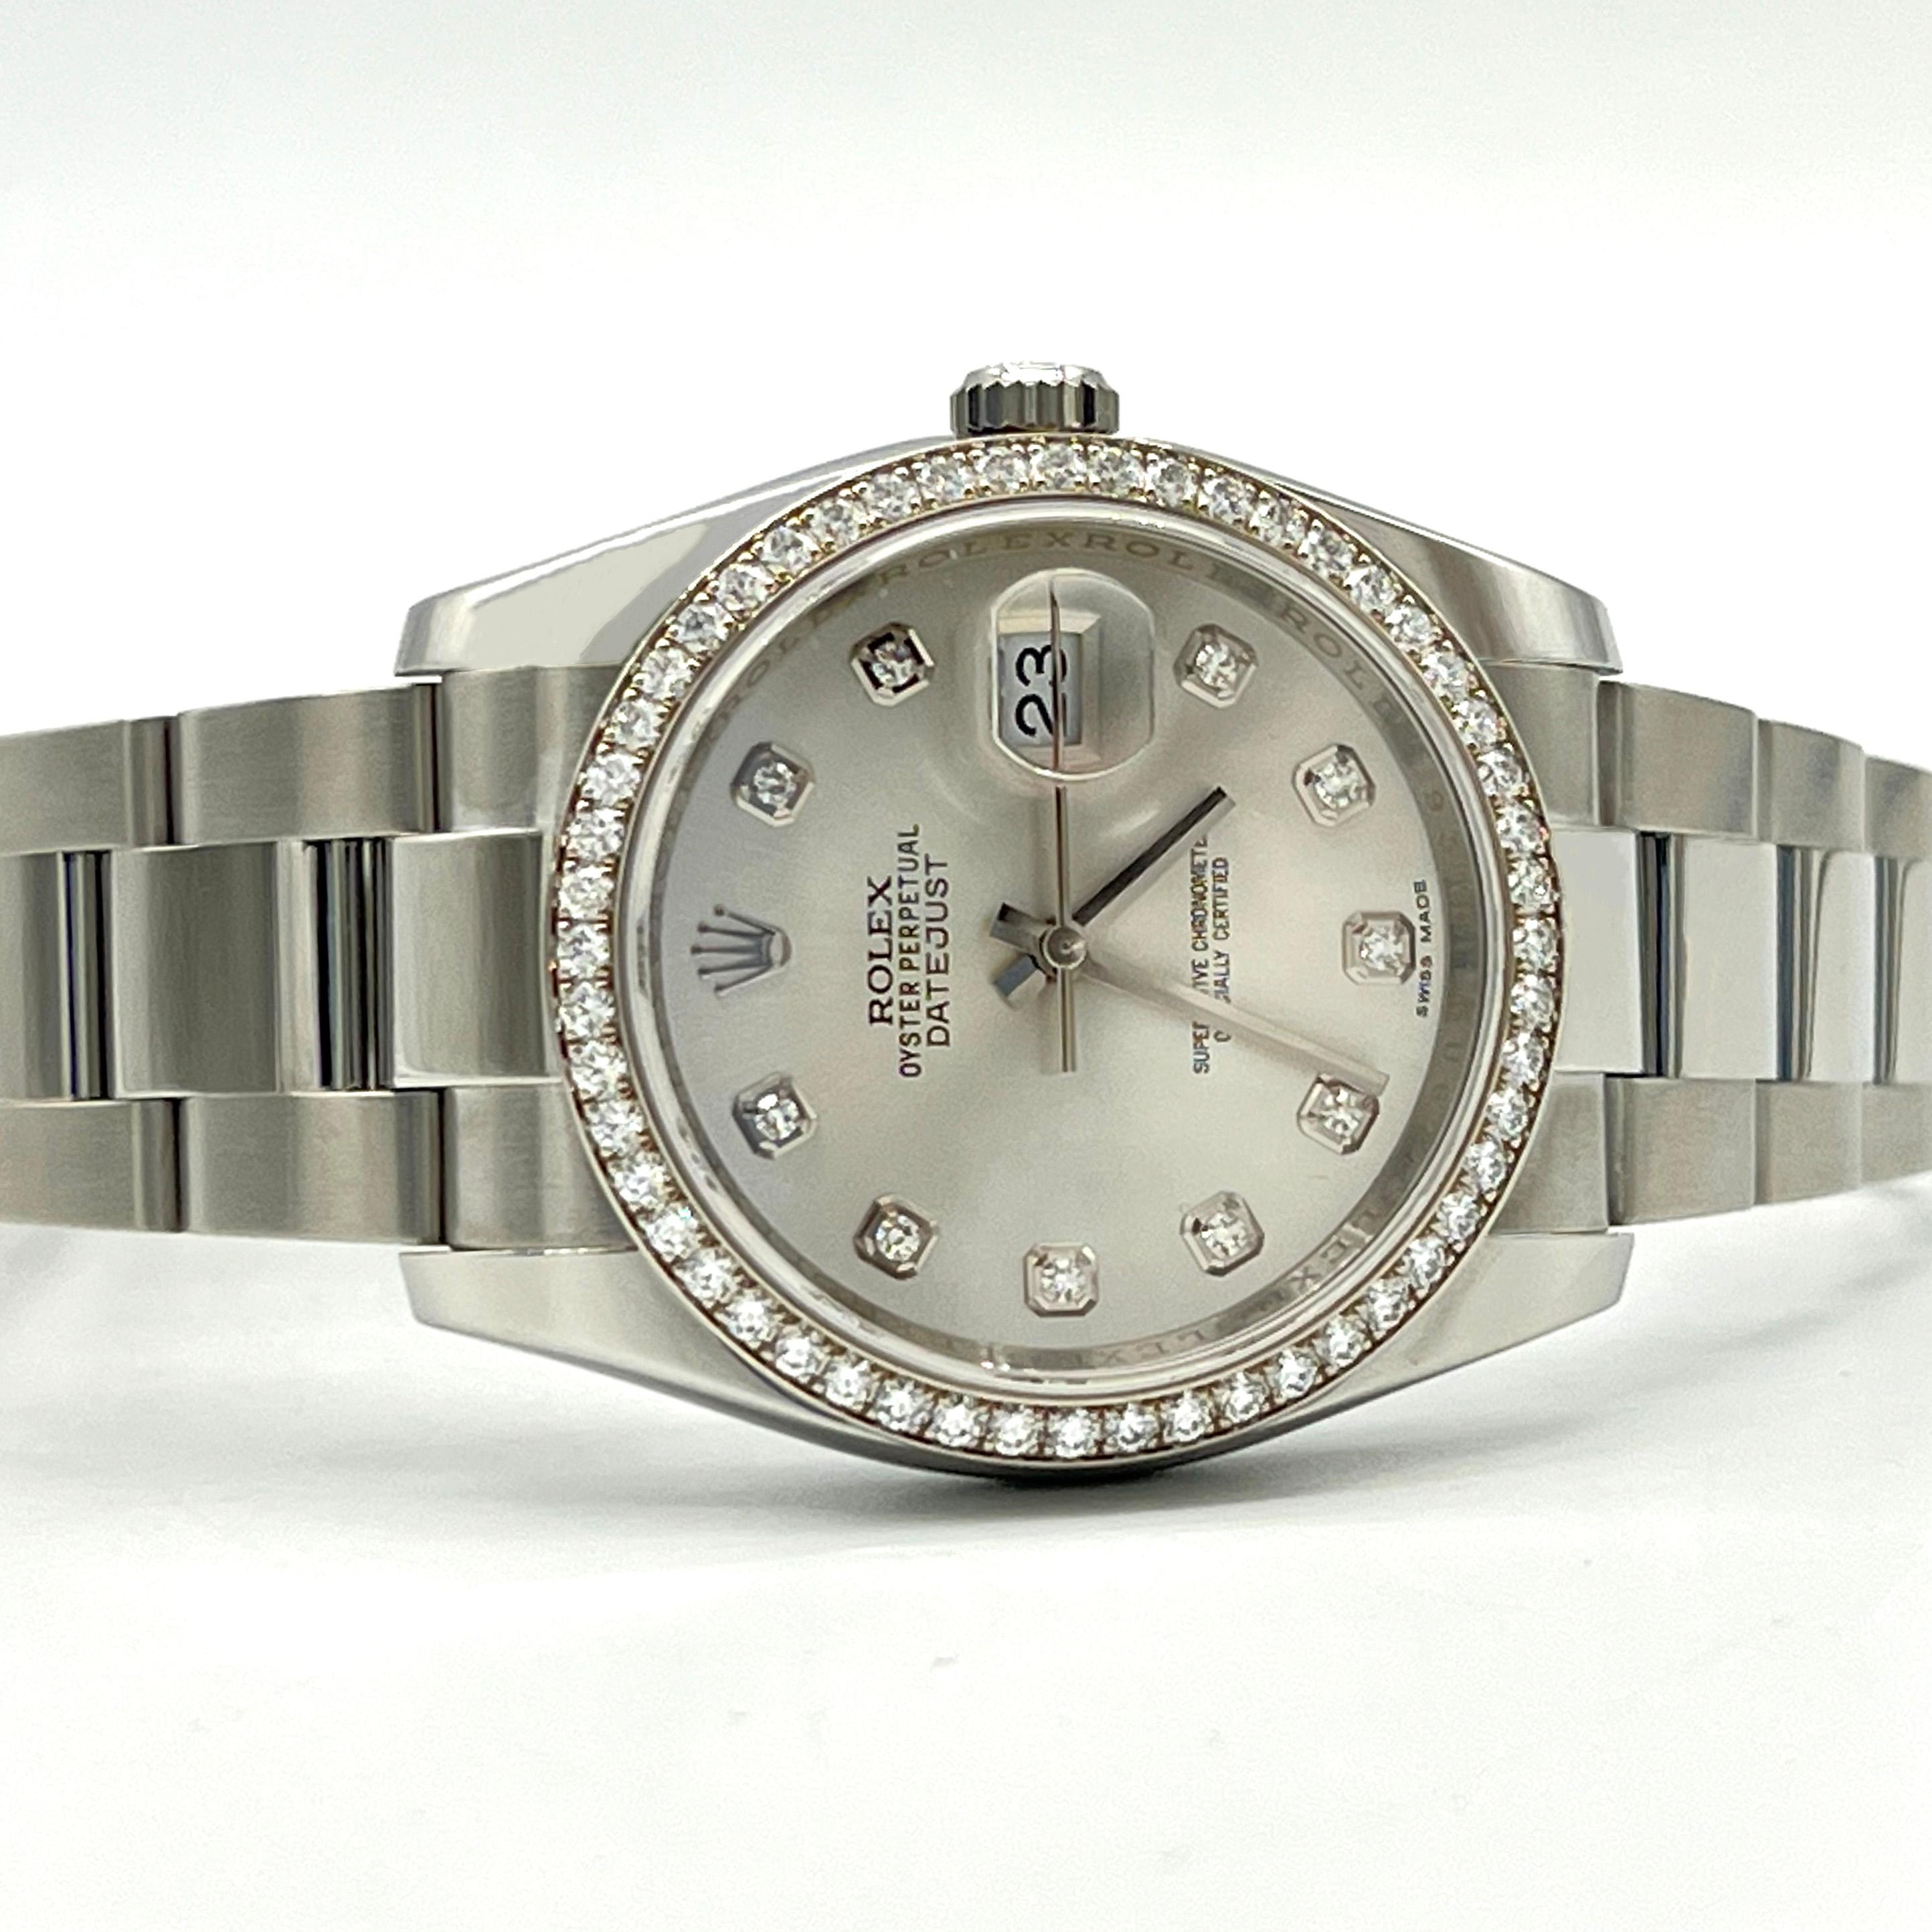 Brand New Elegant Rolex Datejust, Reference Number: 116244; 36mm The case material is Steel features a Factory Diamond Smooth Silver Dial & Original Diamond Index, self-winding waterproof chronometer feature a window displaying the date. Magnified